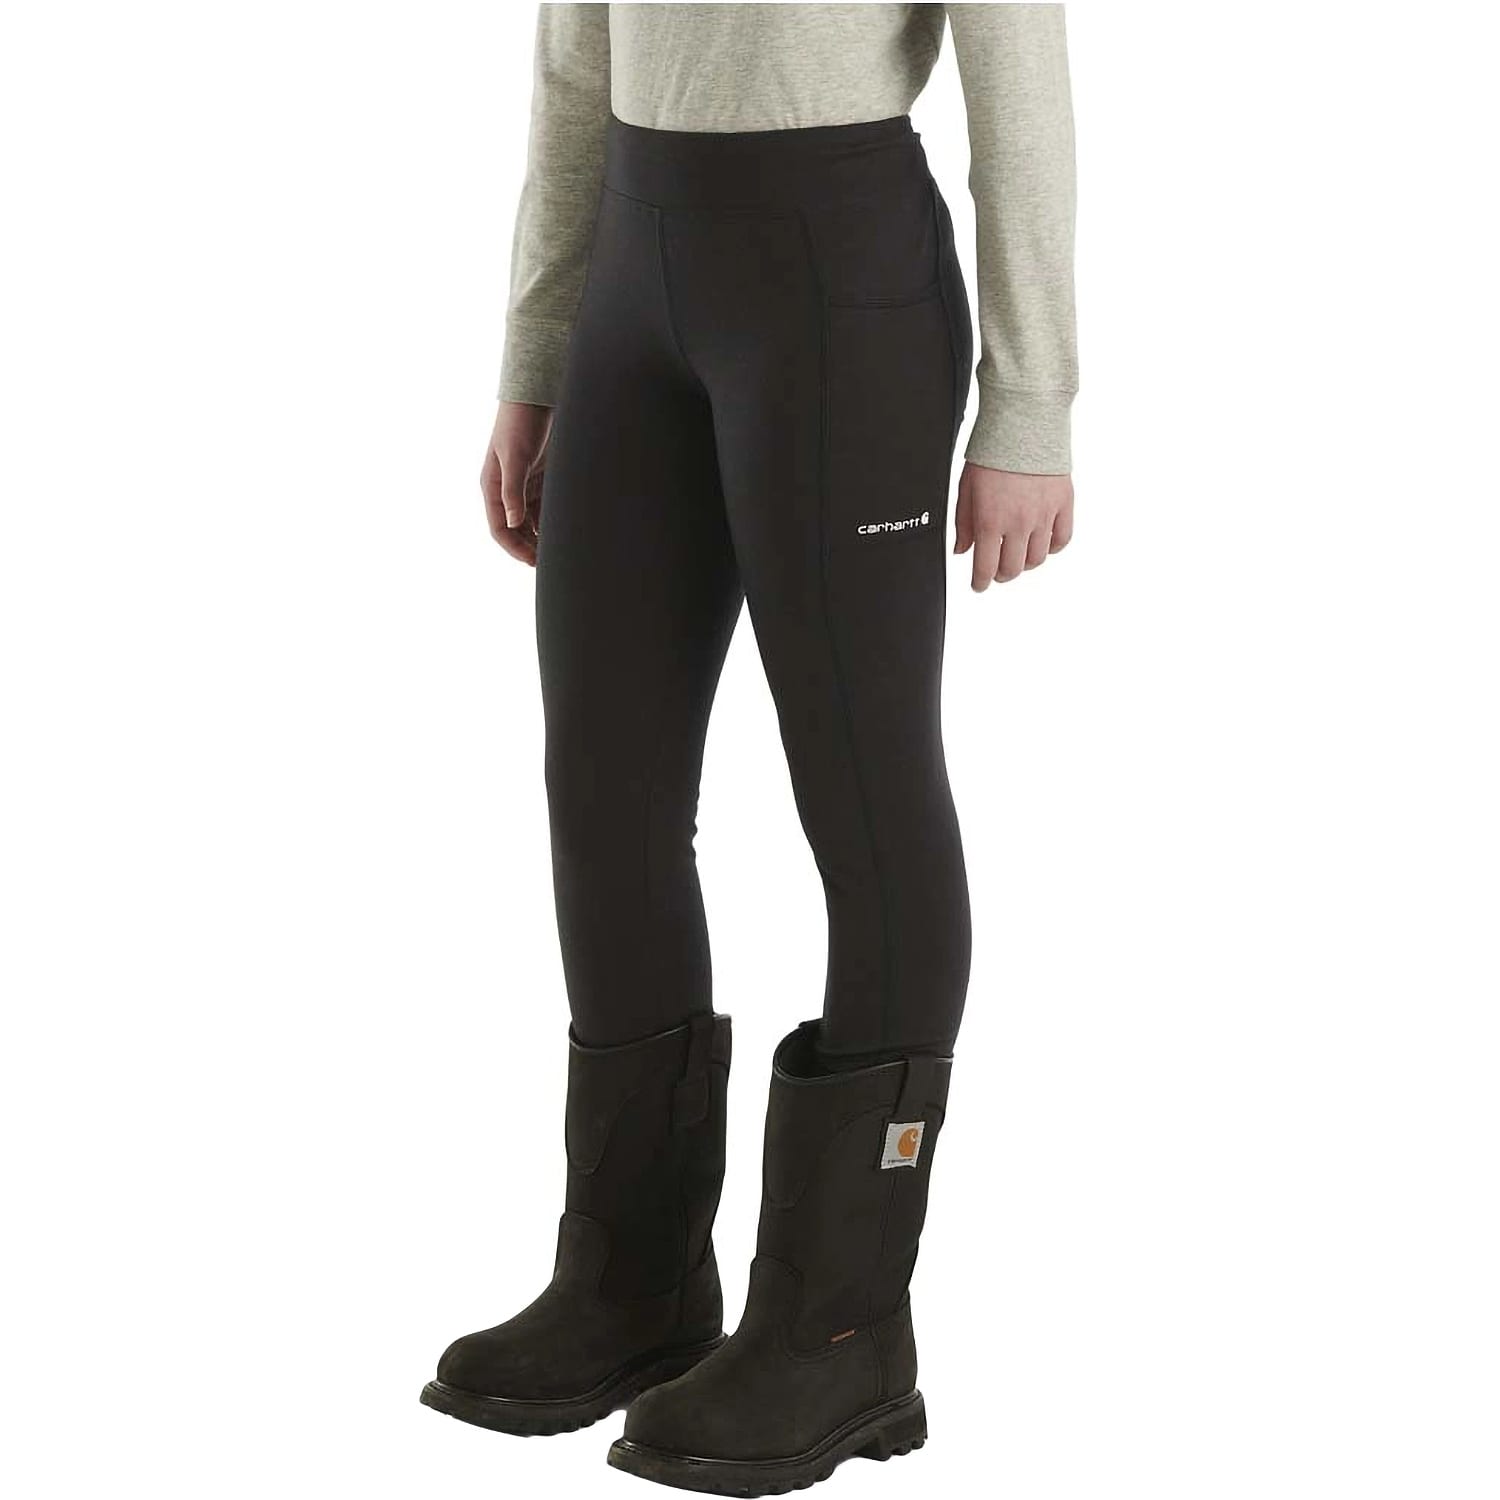 Carhartt® Women's Force Fitted Midweight Utility Legging